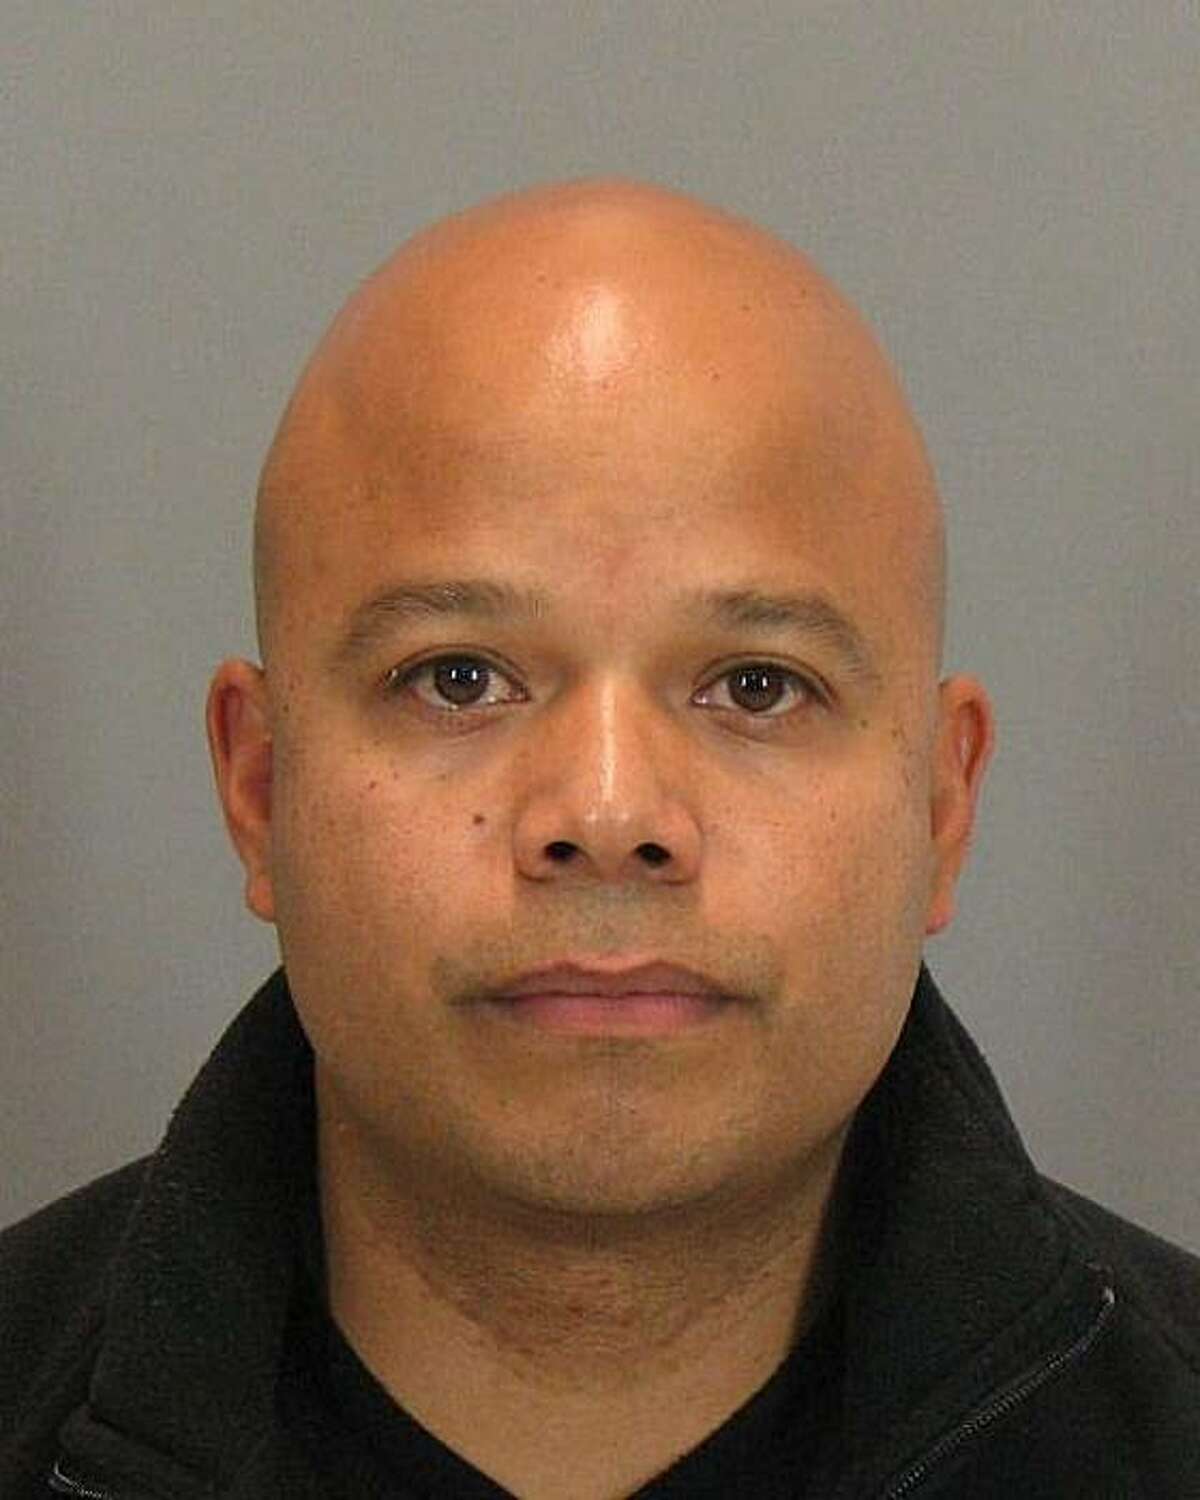 Santa Clara police Officer Clay Rojas, suspected of passing confidential information to a Hells Angels member.